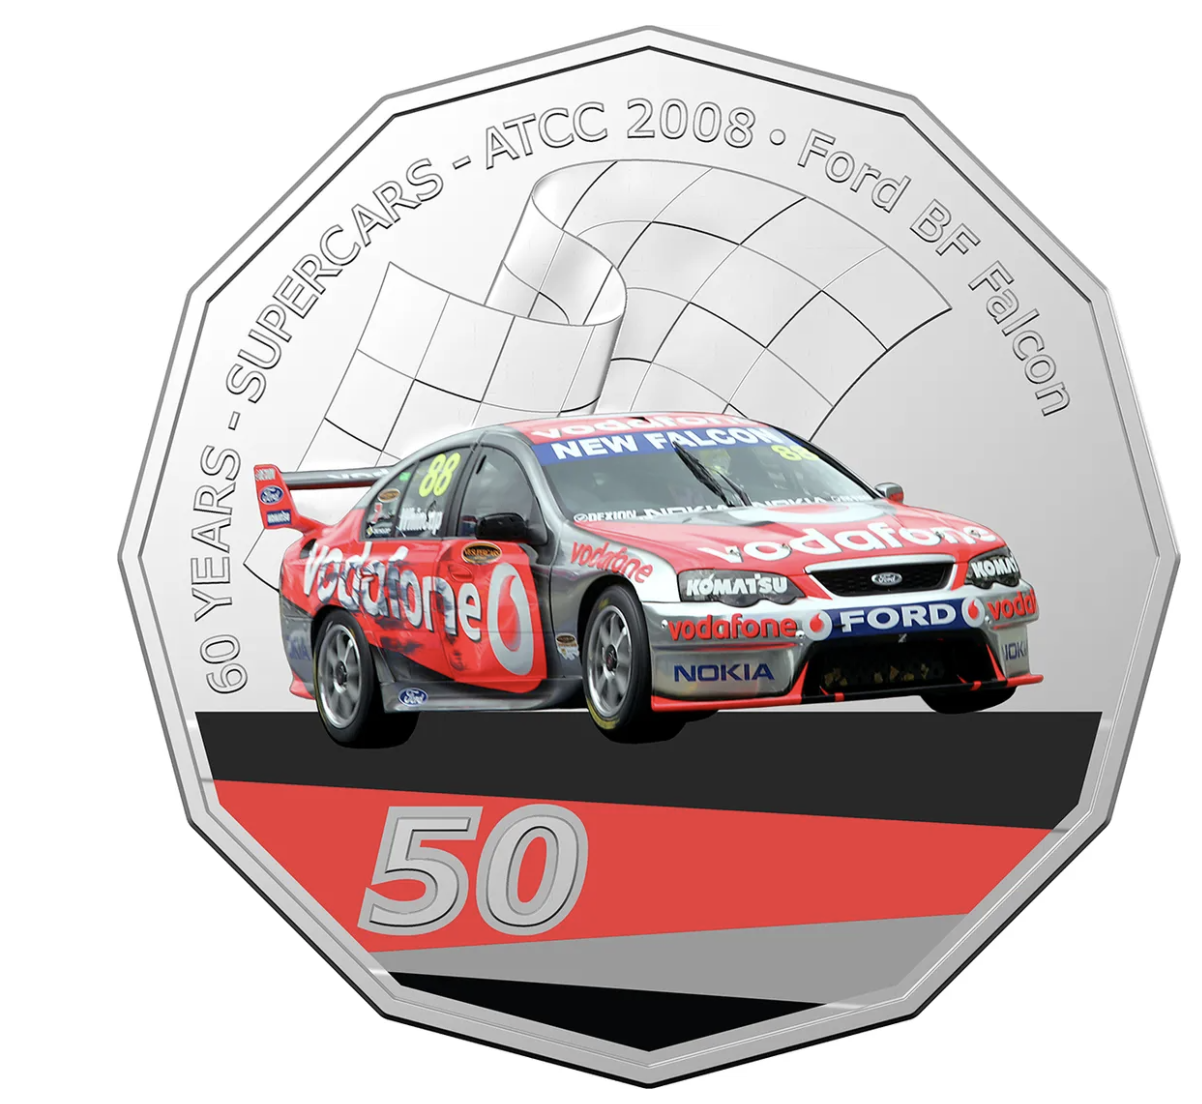 2020 50c 60 Years of Supercars - 2008 Ford BF Falcon Jamie Whincup